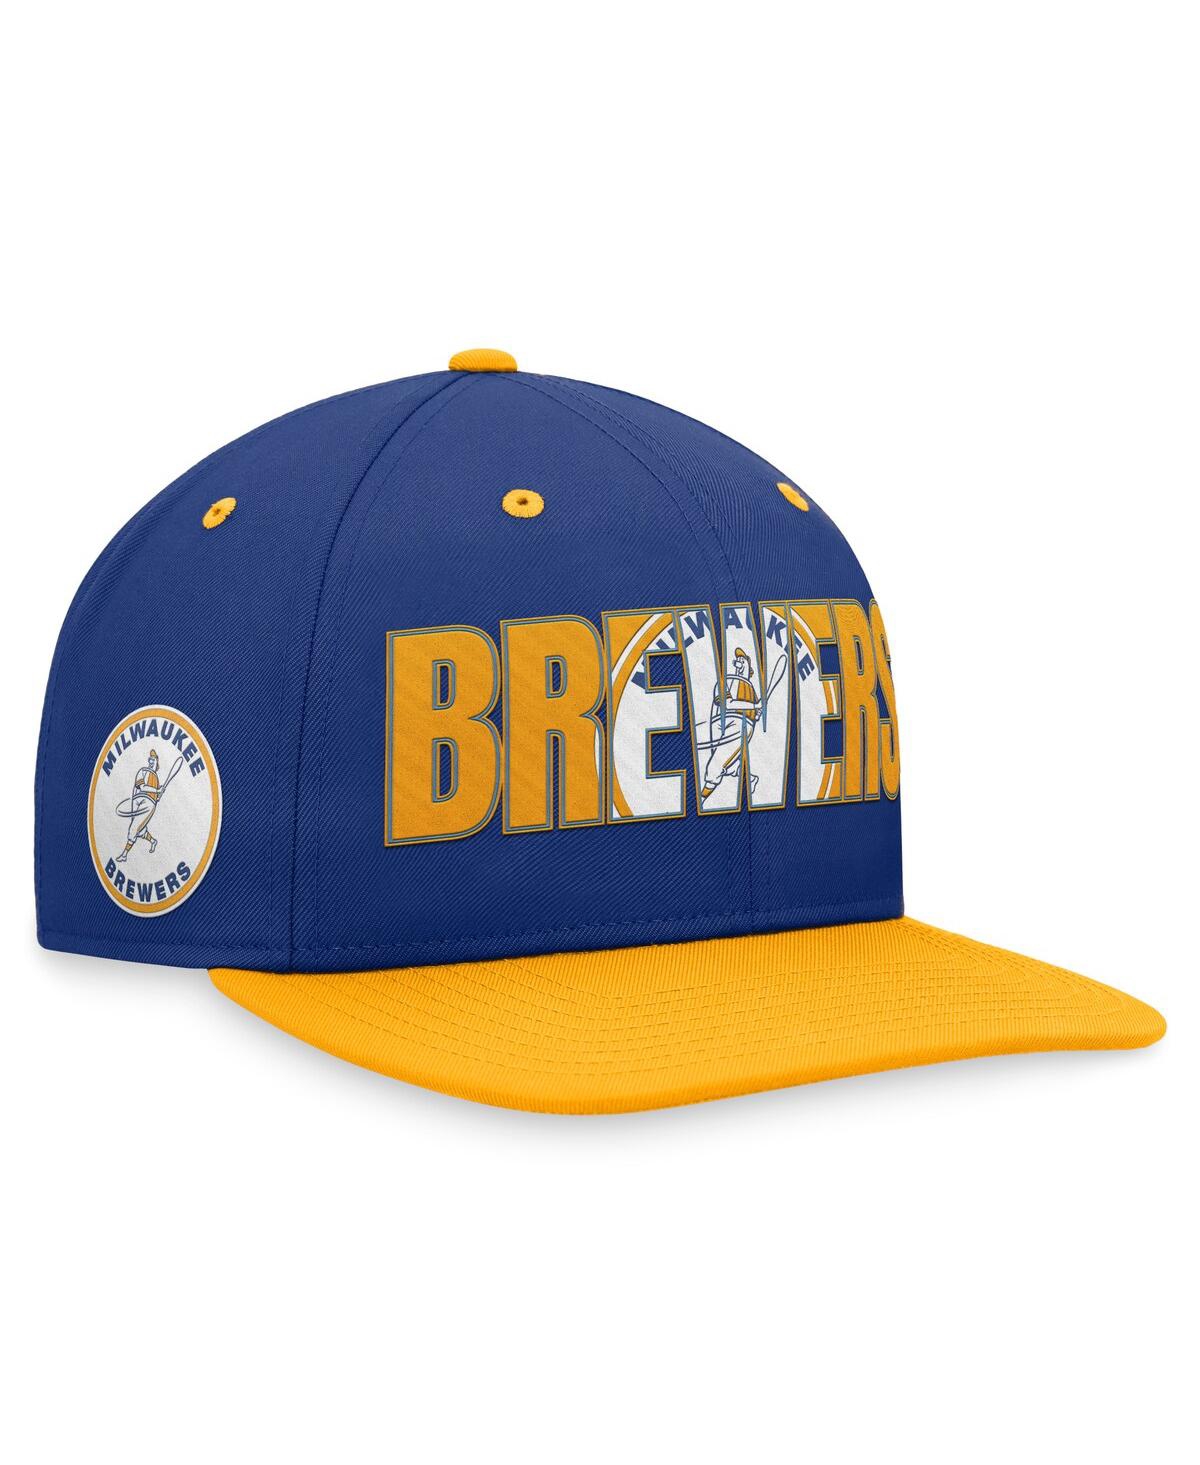 Nike Men's  Royal Milwaukee Brewers Cooperstown Collection Pro Snapback Hat